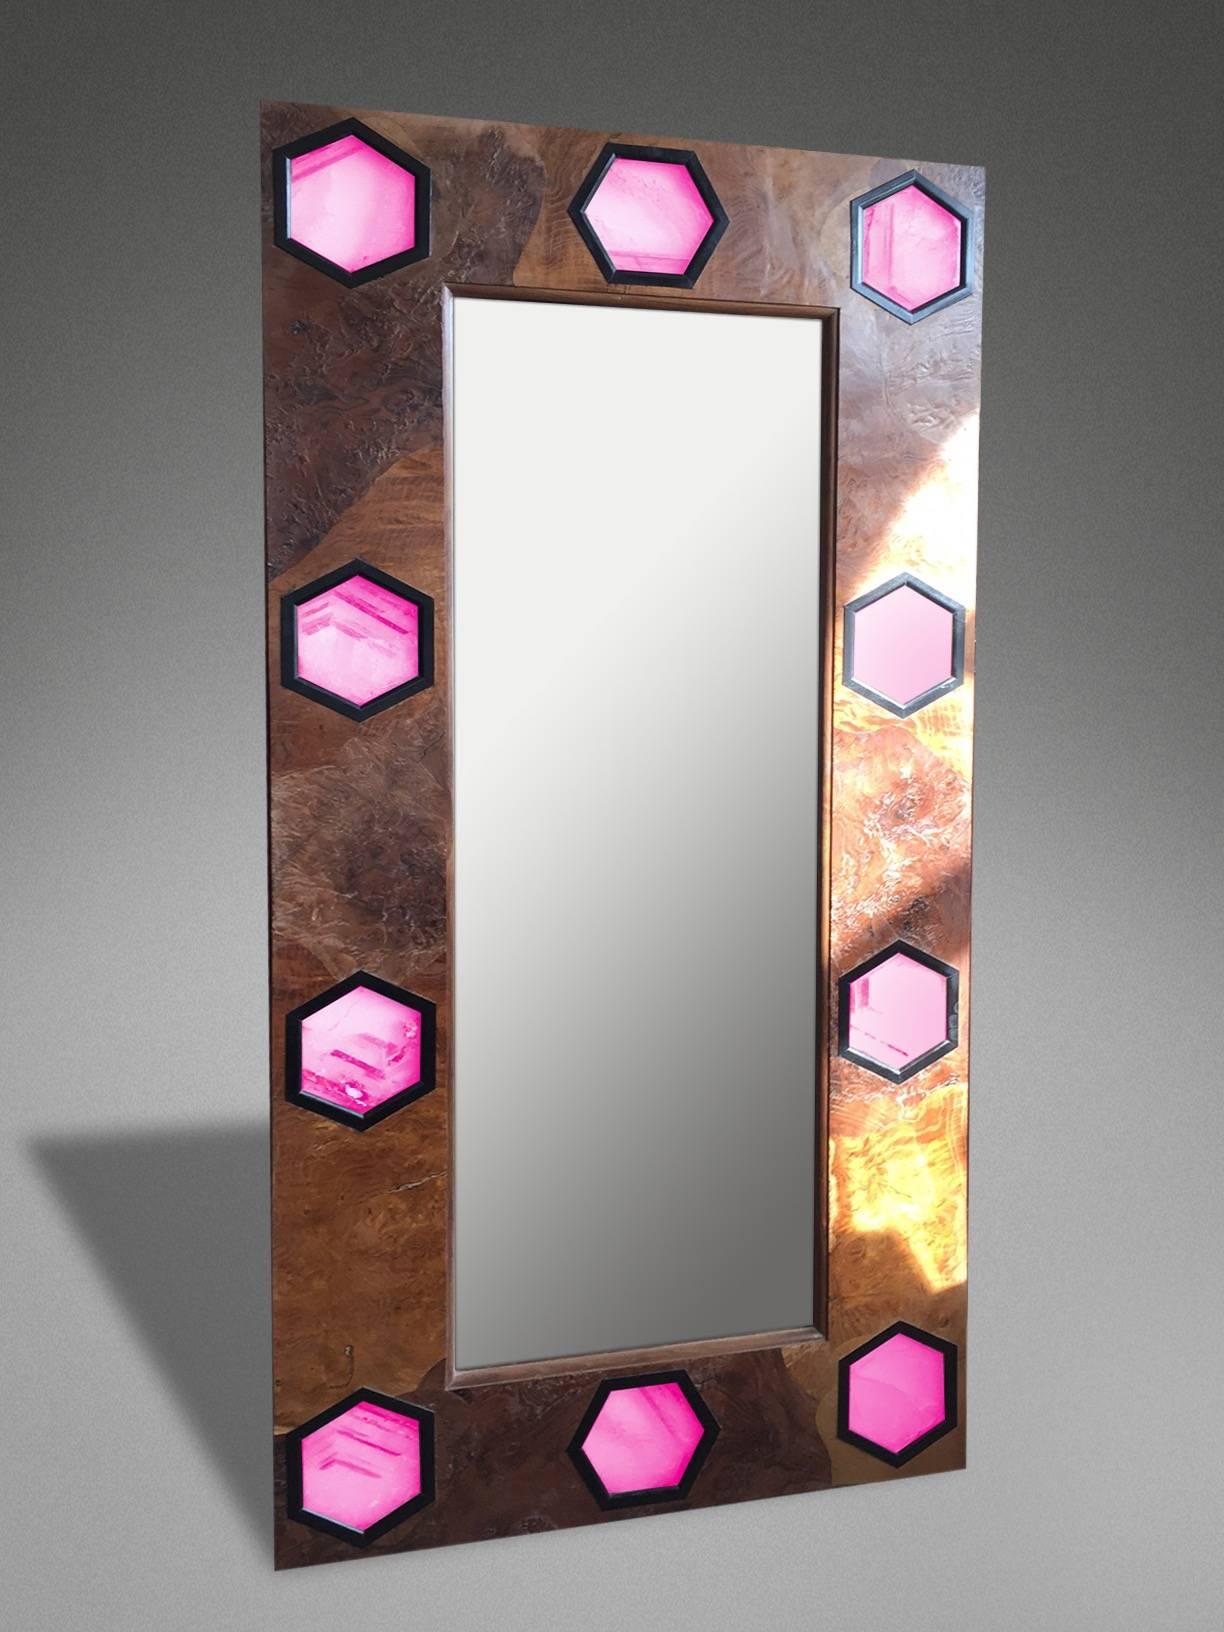 20th Century 1930s Style Mirror with Rare Veneers and Solid Quartz Hexagonal Plaques For Sale